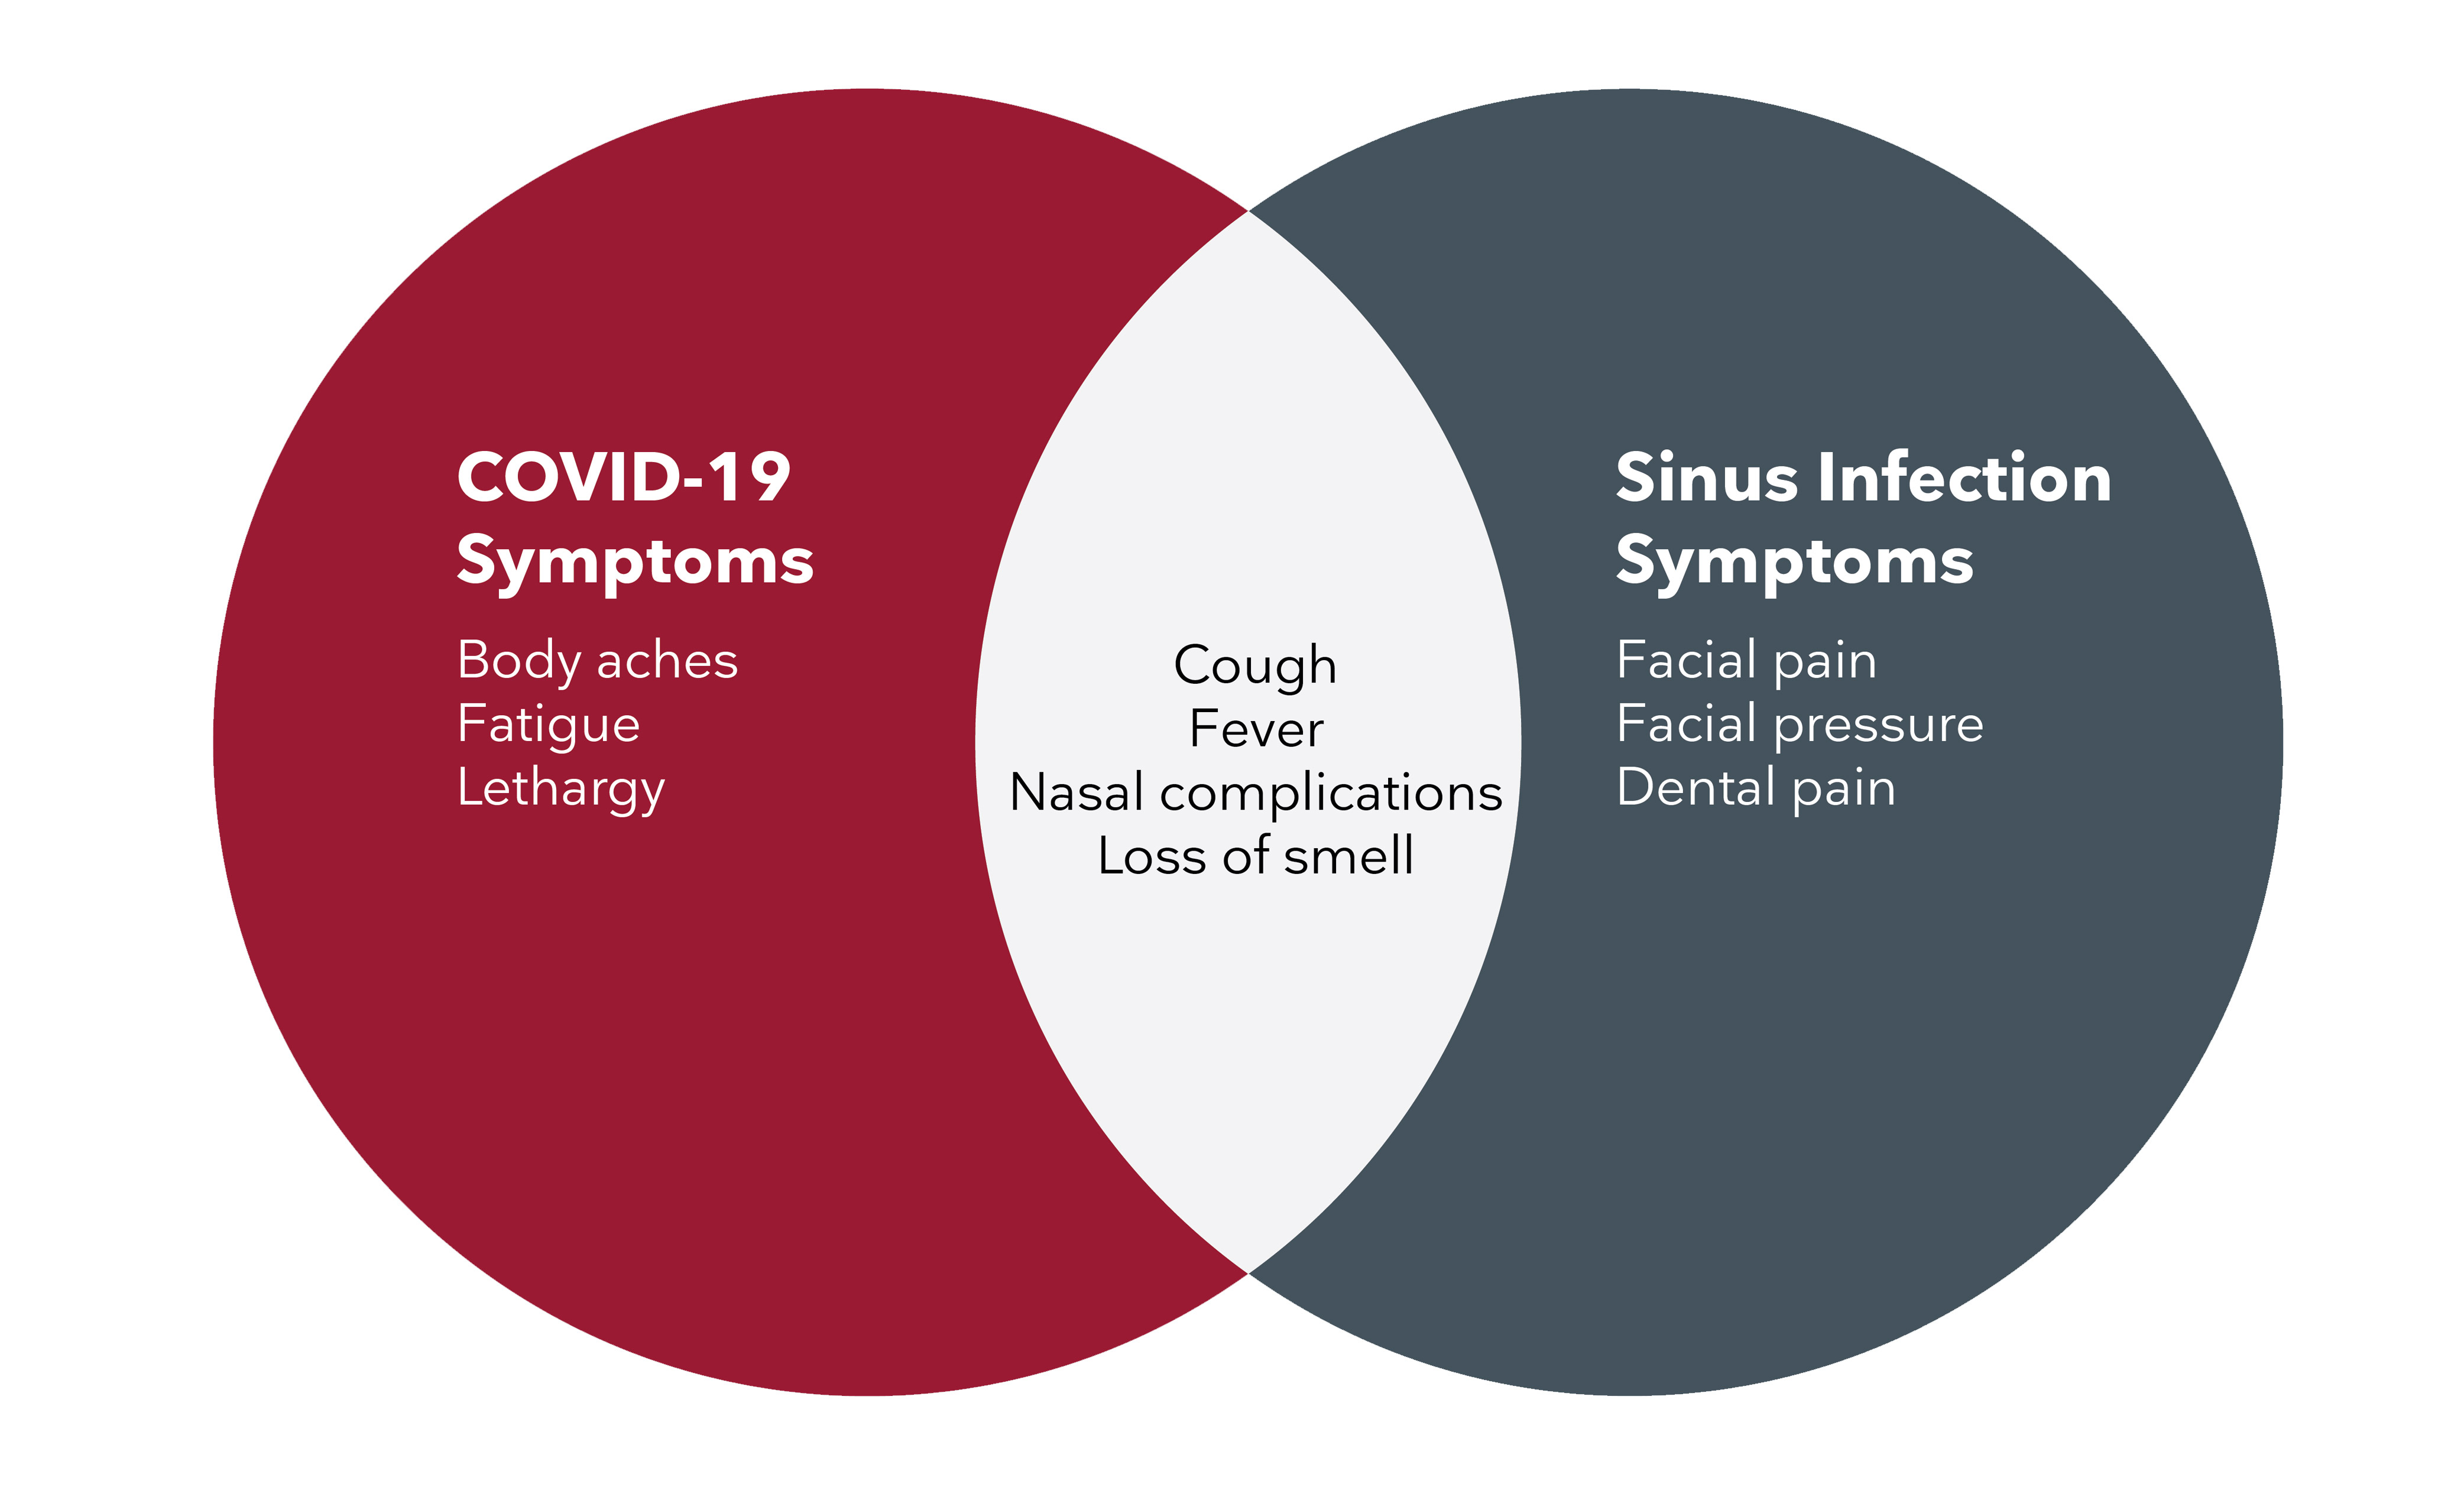 Many symptoms overlap for COVID-19 and routine sinus issues. 